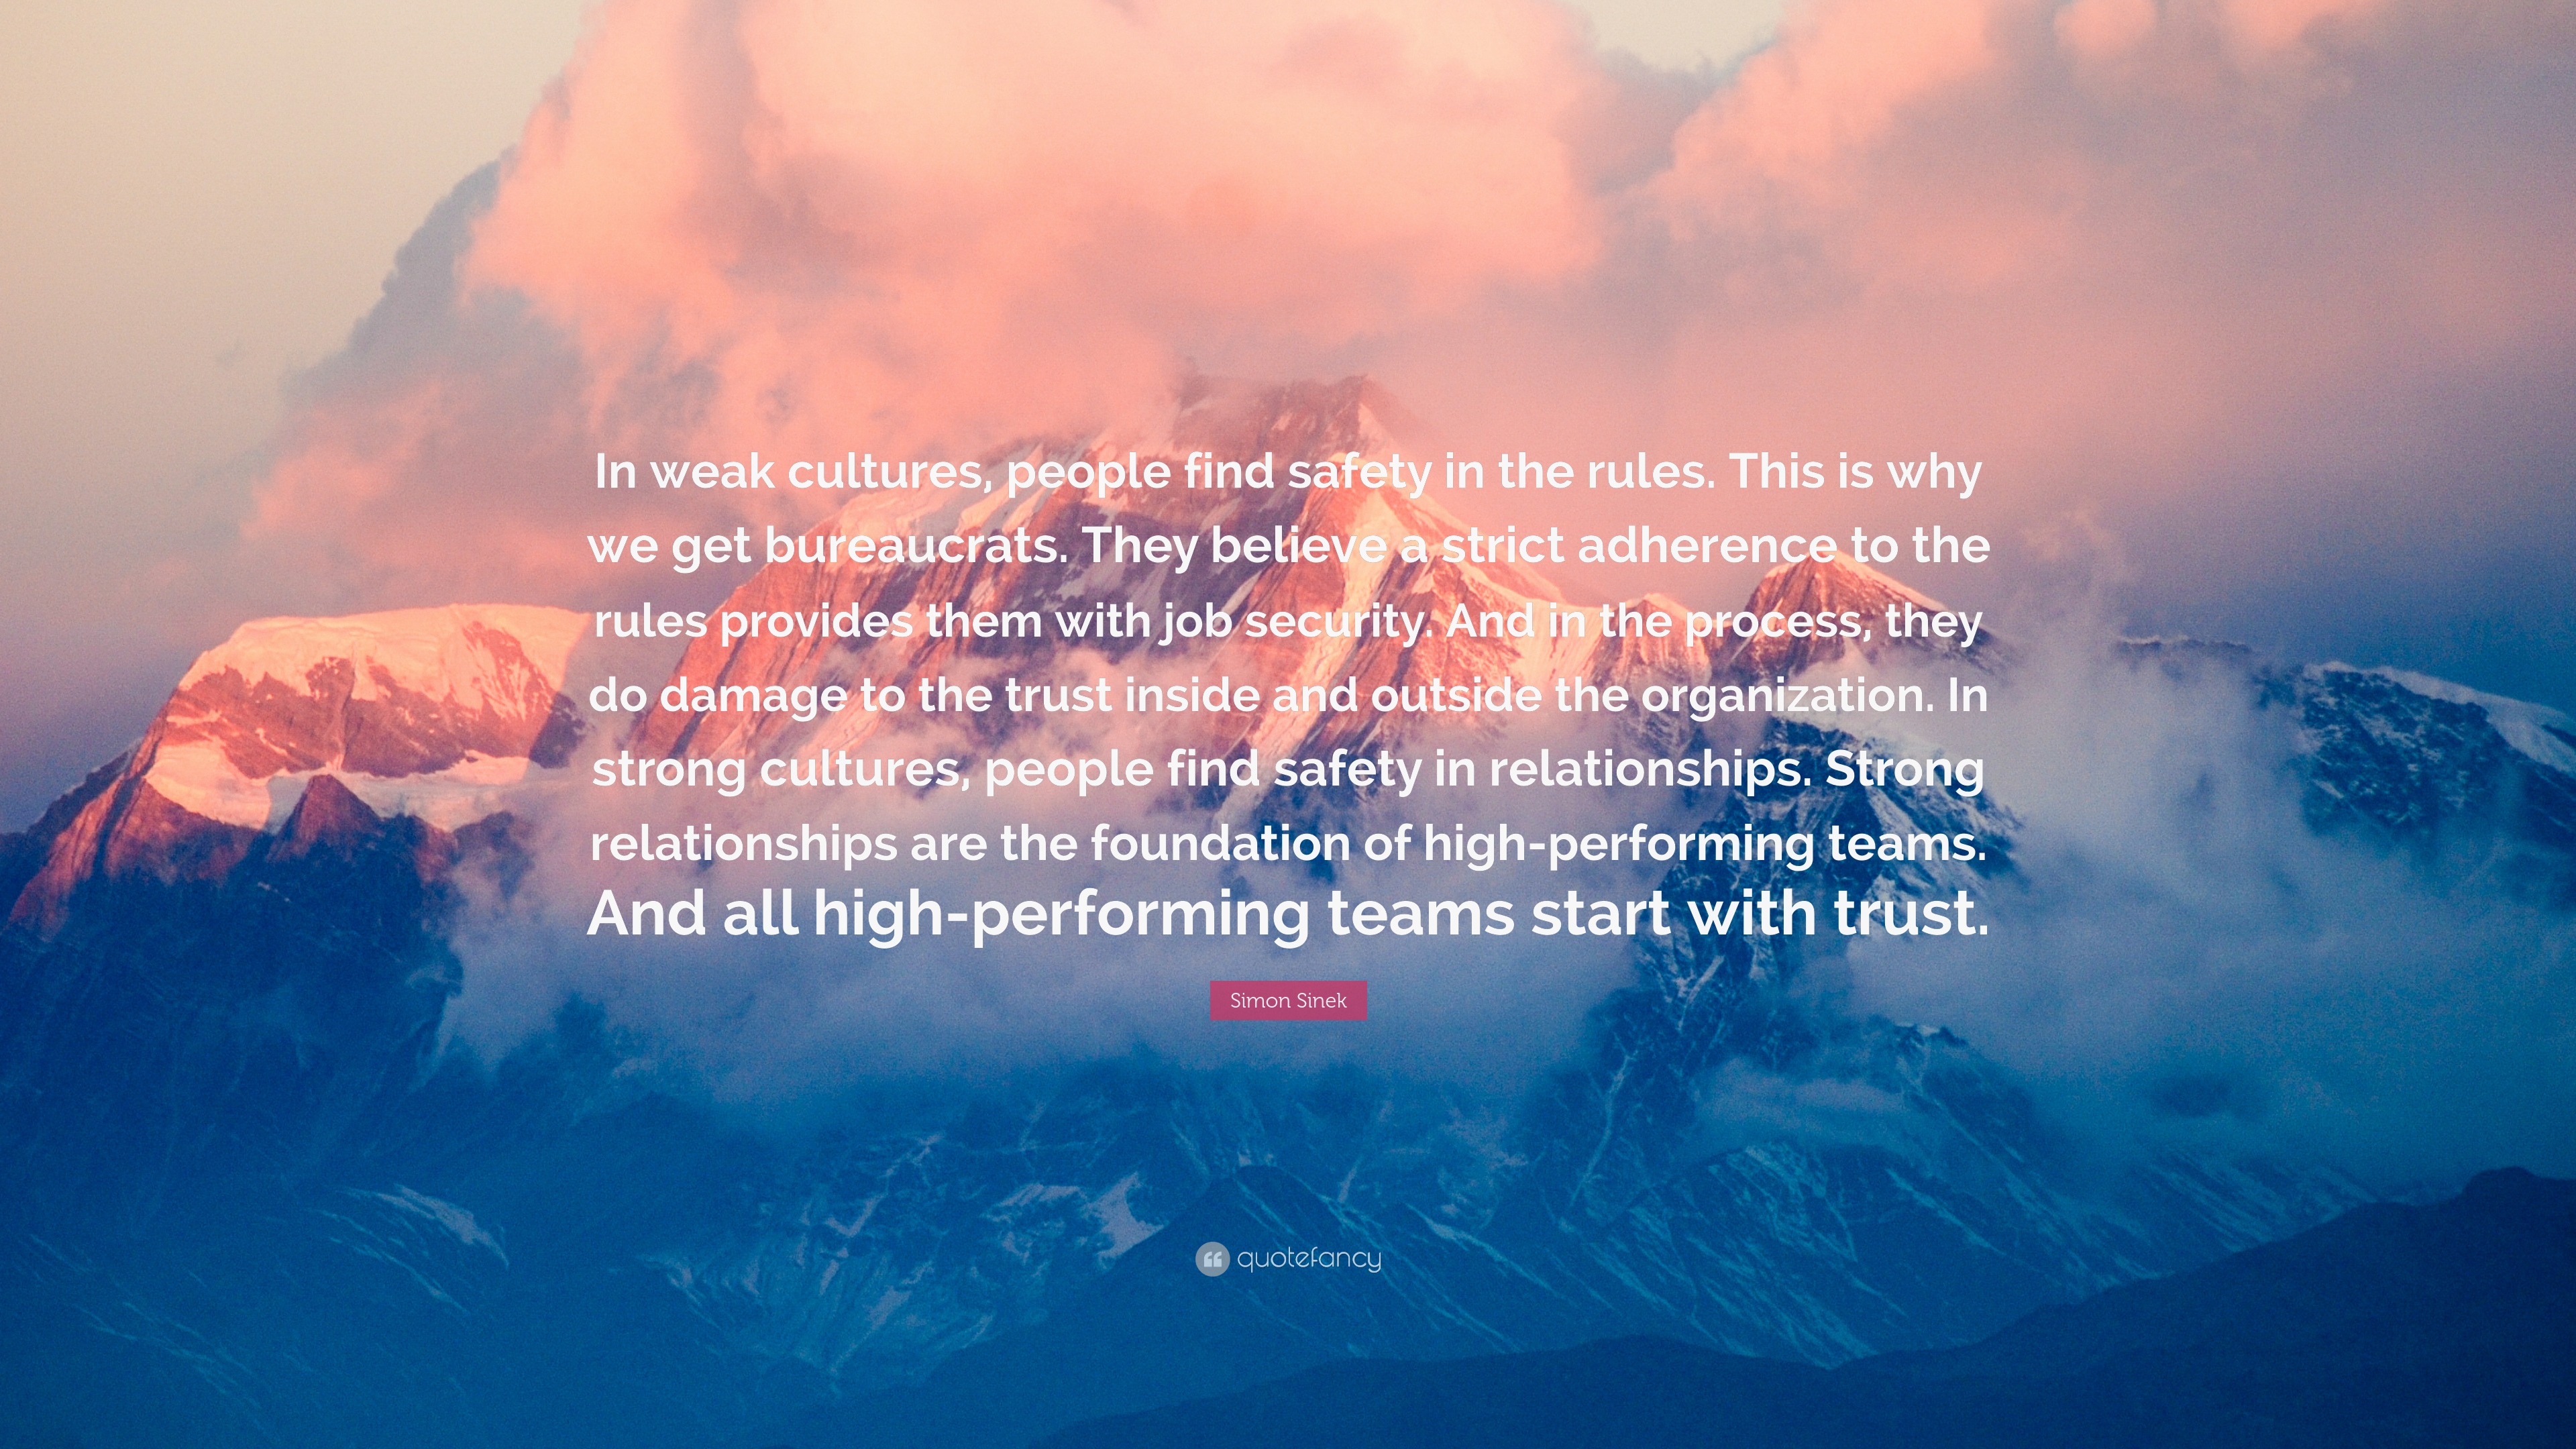 Simon Sinek Quote: “In weak cultures, people find safety in the rules ...